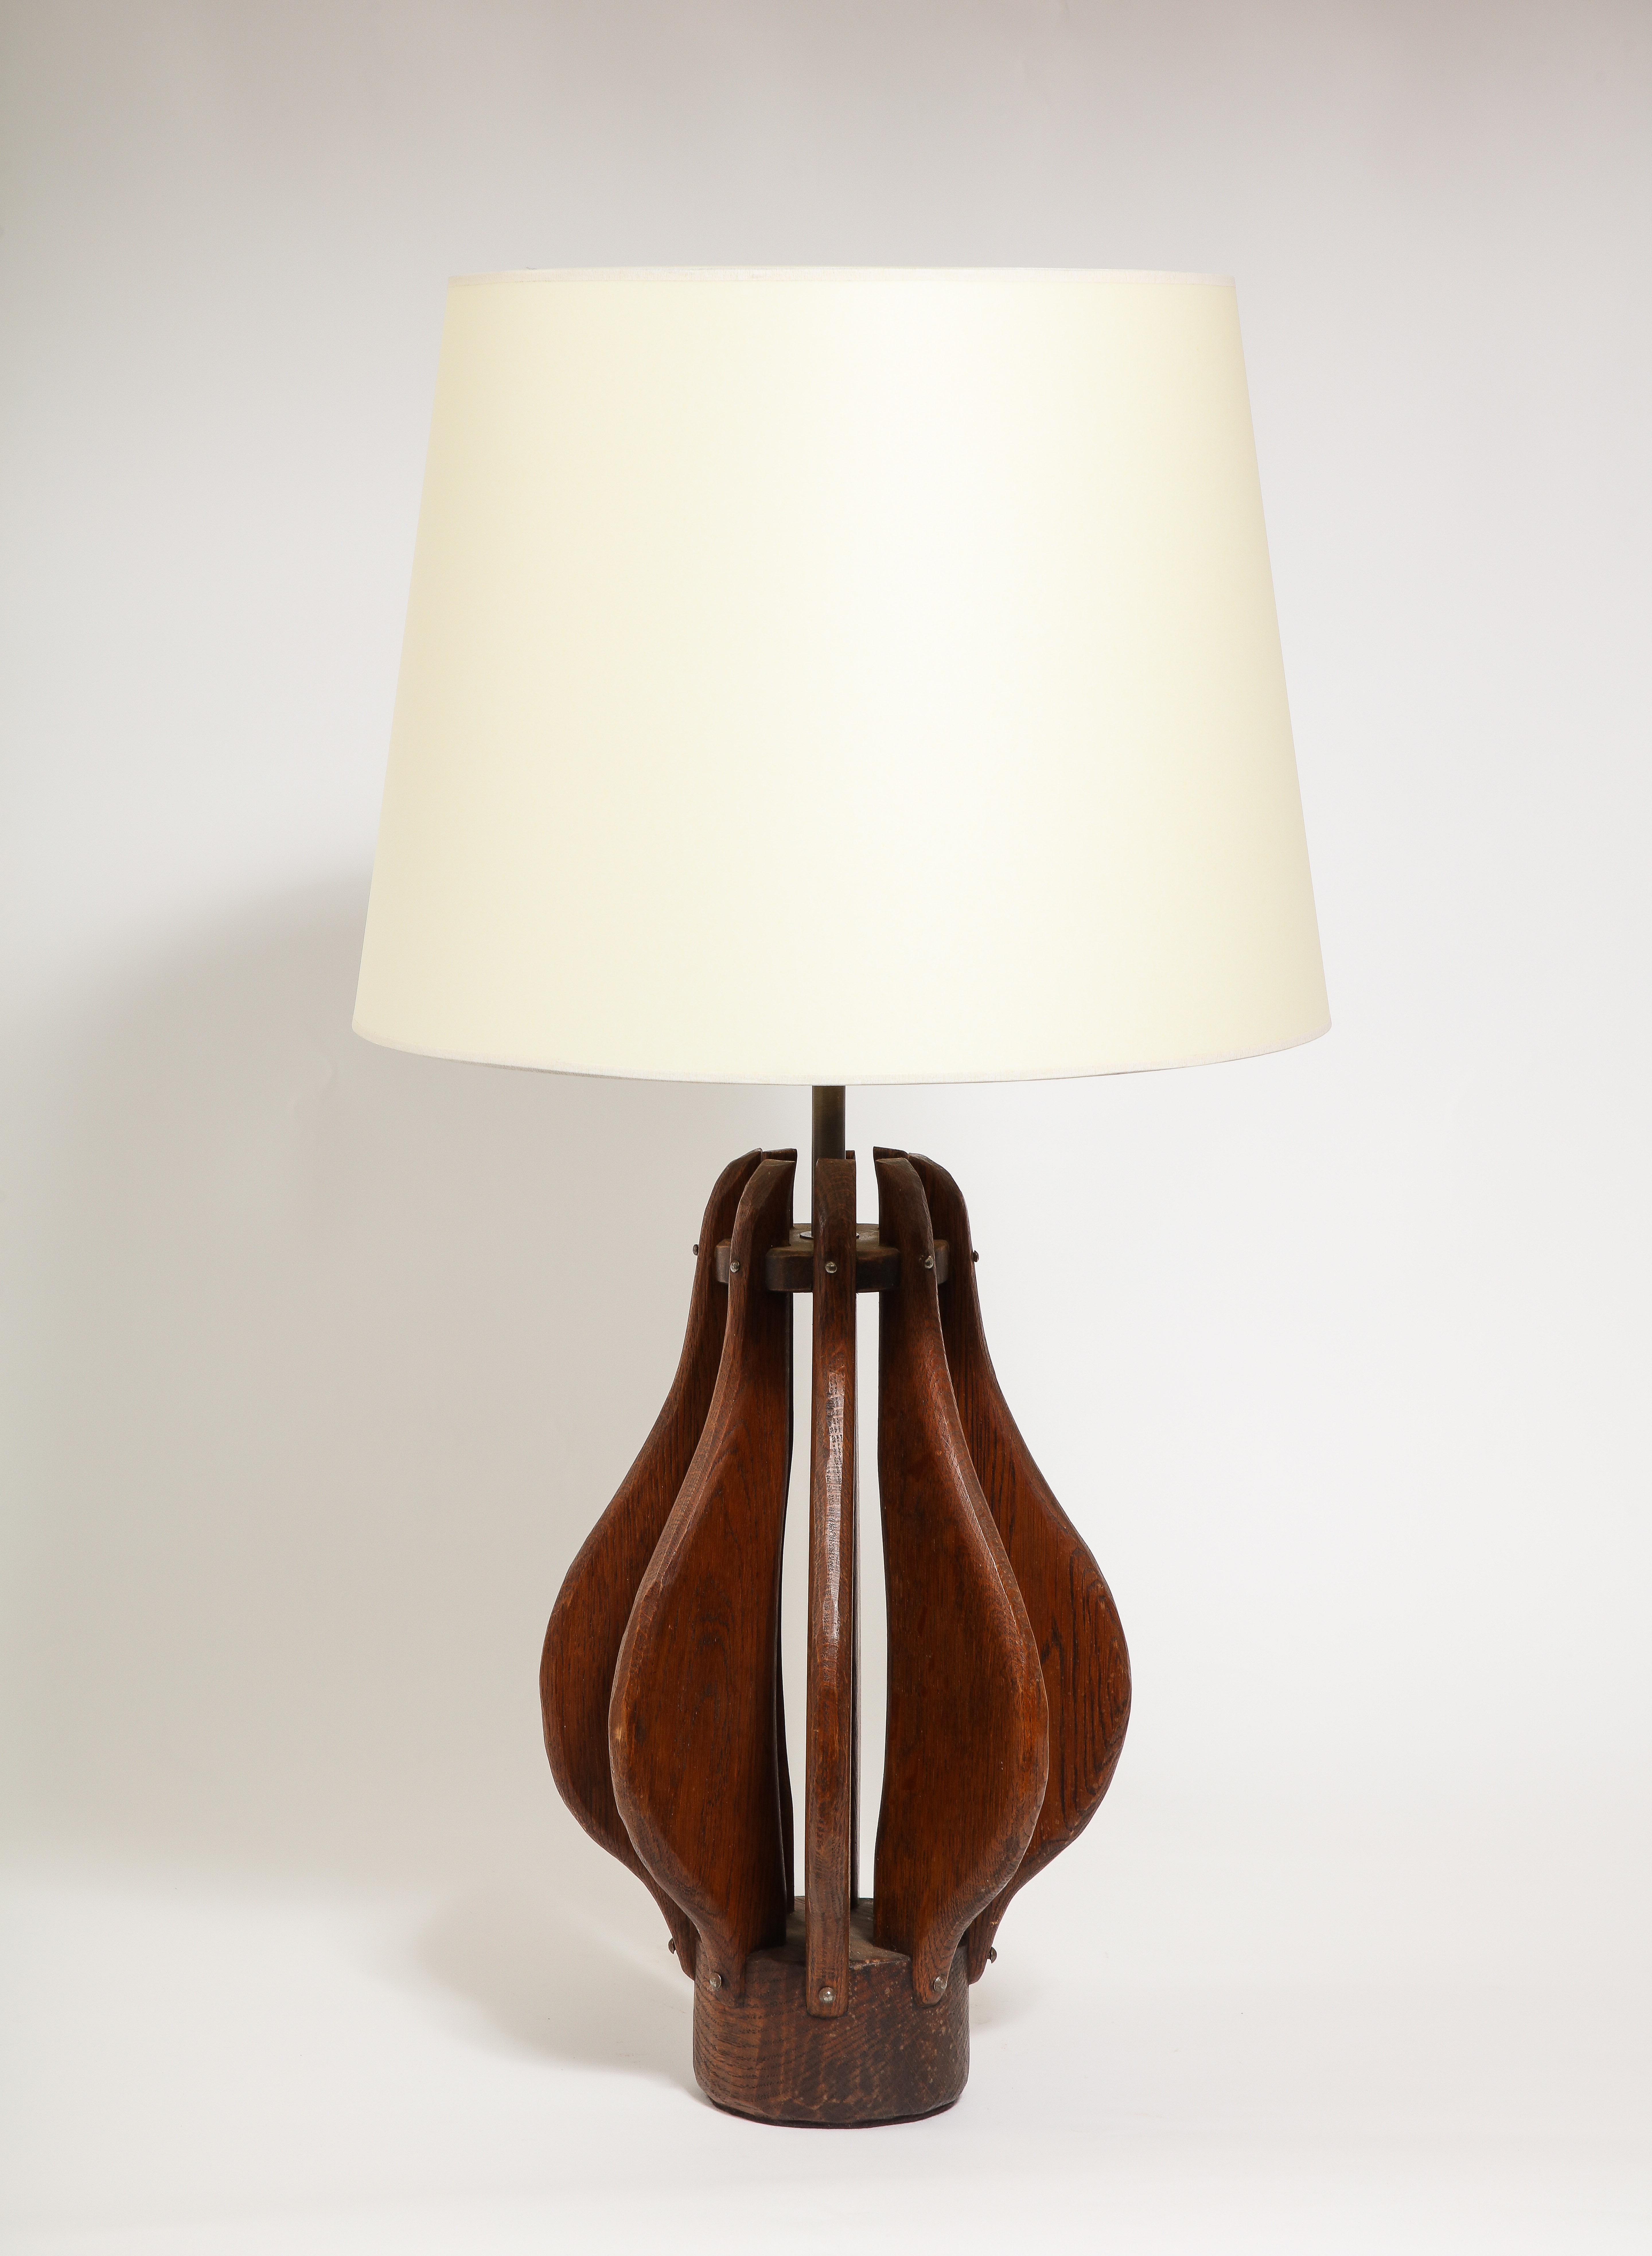 Brutalist table lamp in carved oak with wrought iron studs. Base only 22x11.
